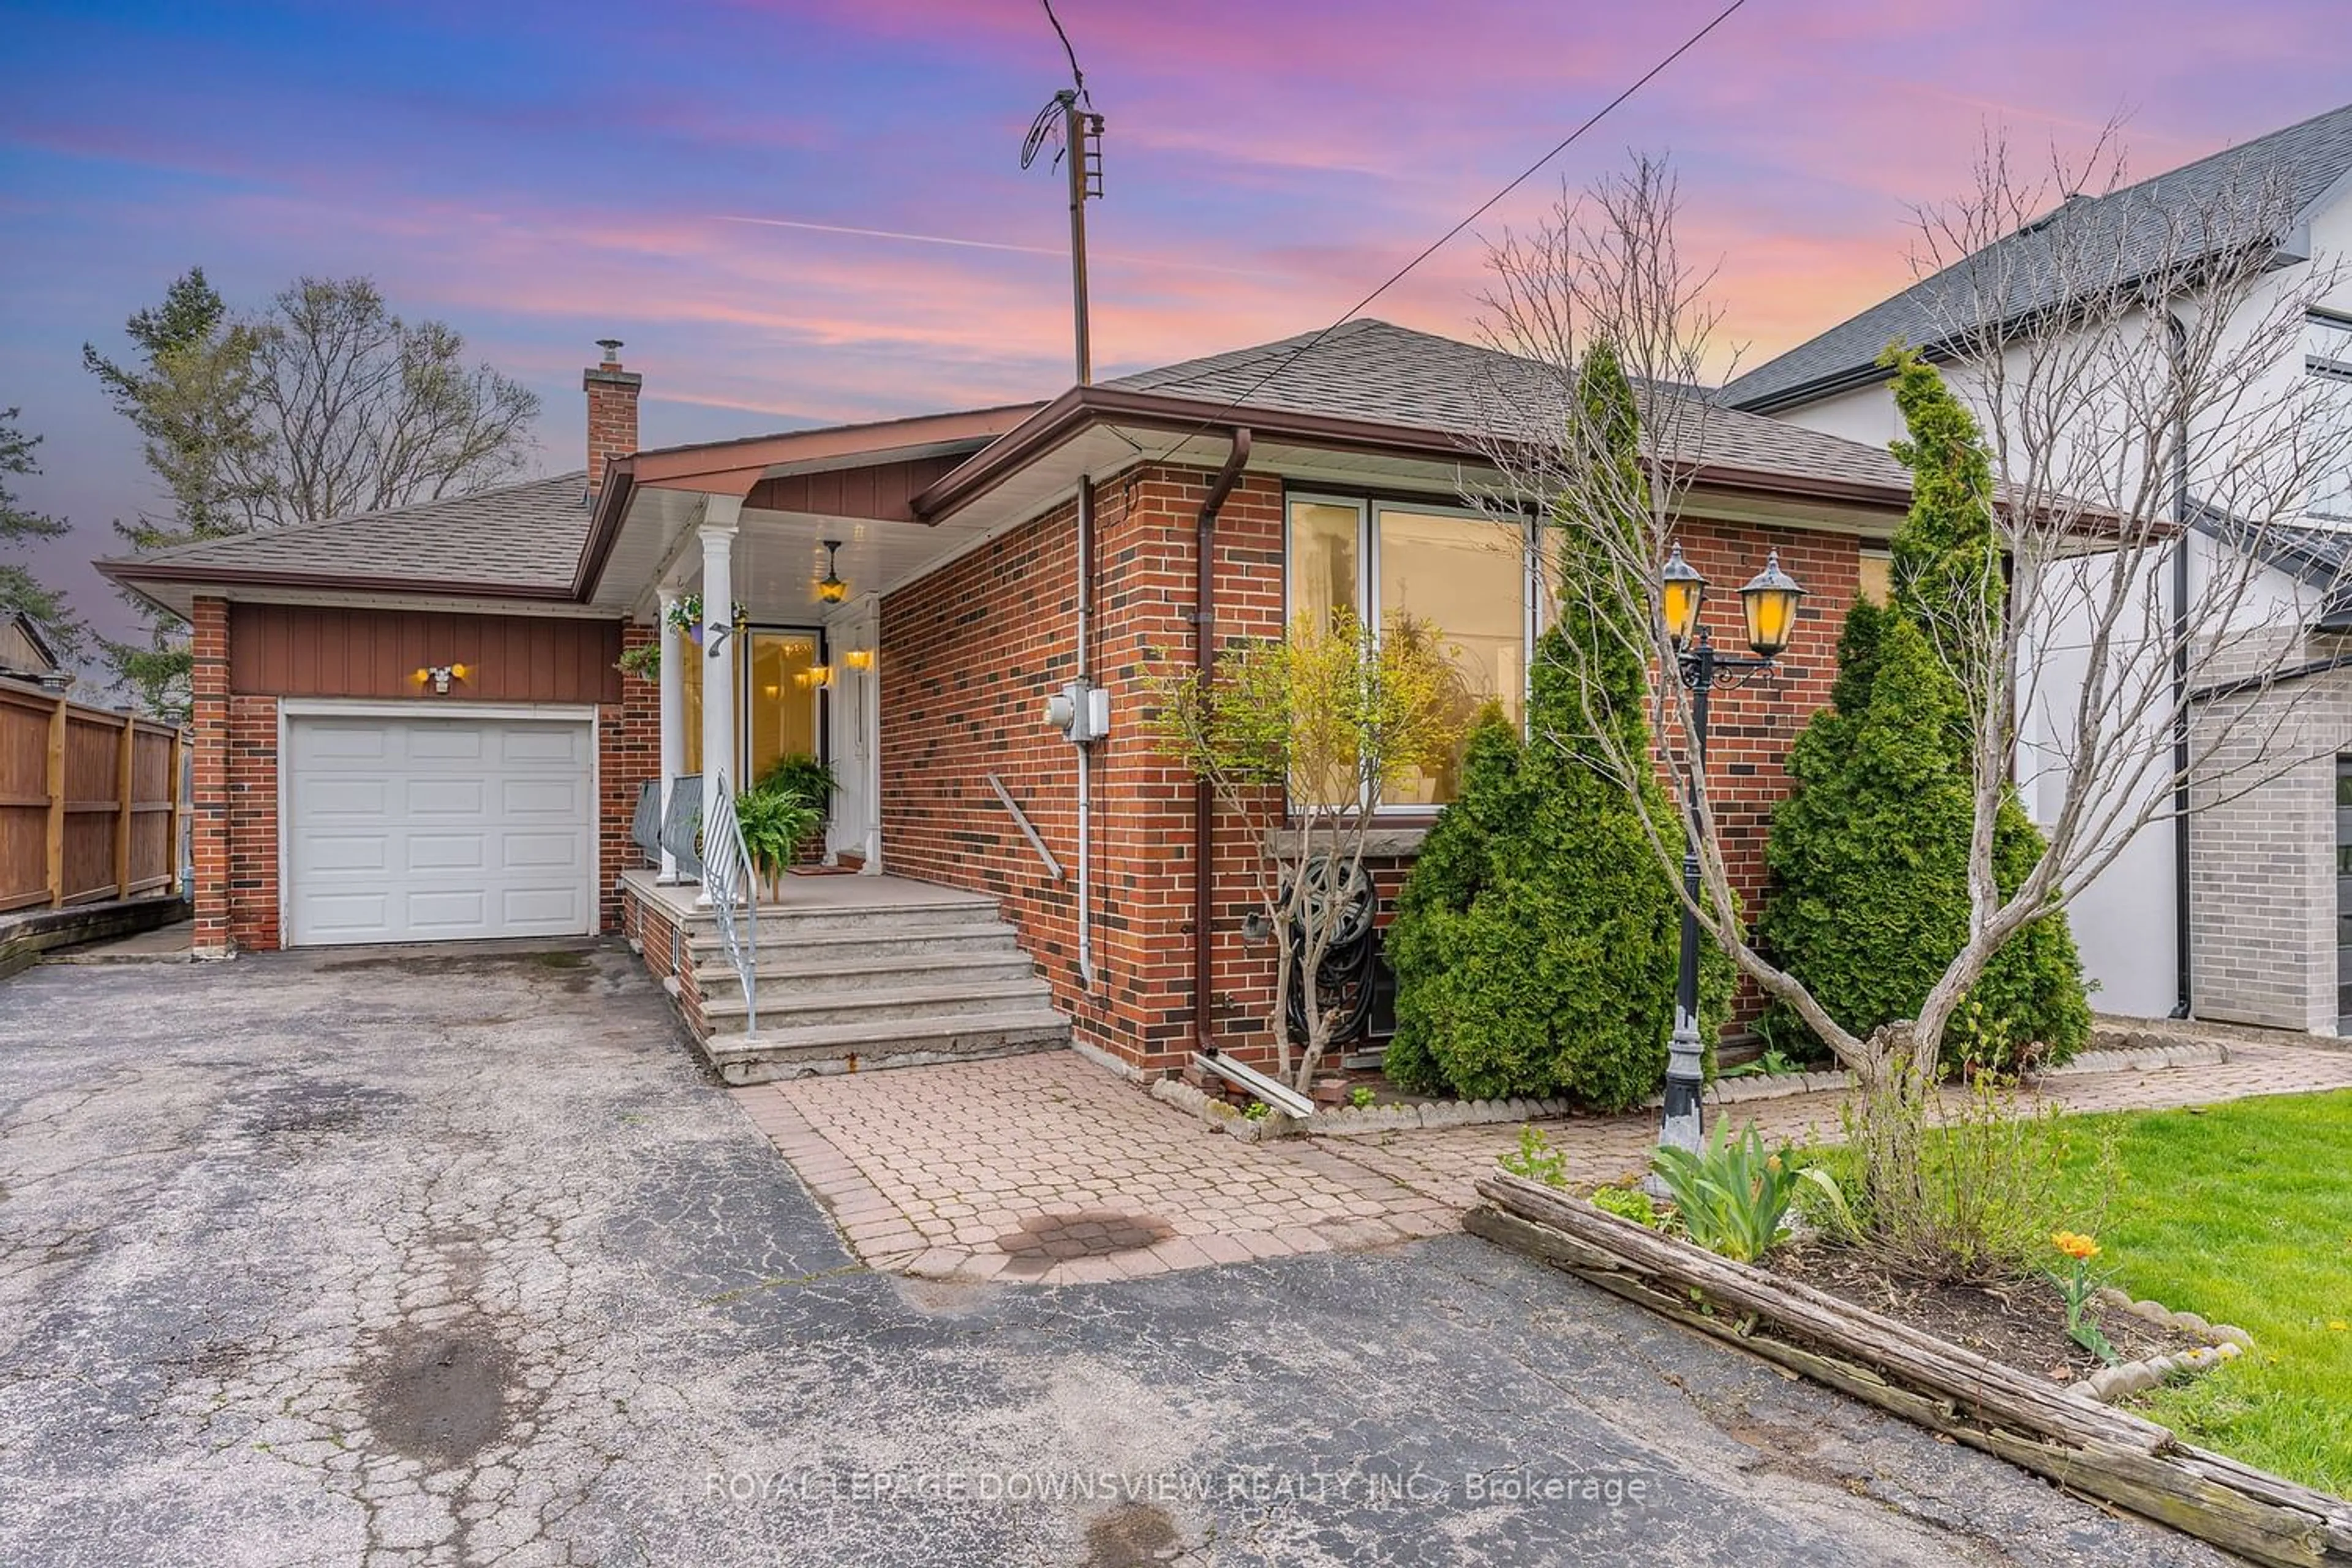 Home with brick exterior material for 7 Burr Ave, Toronto Ontario M6L 1T7